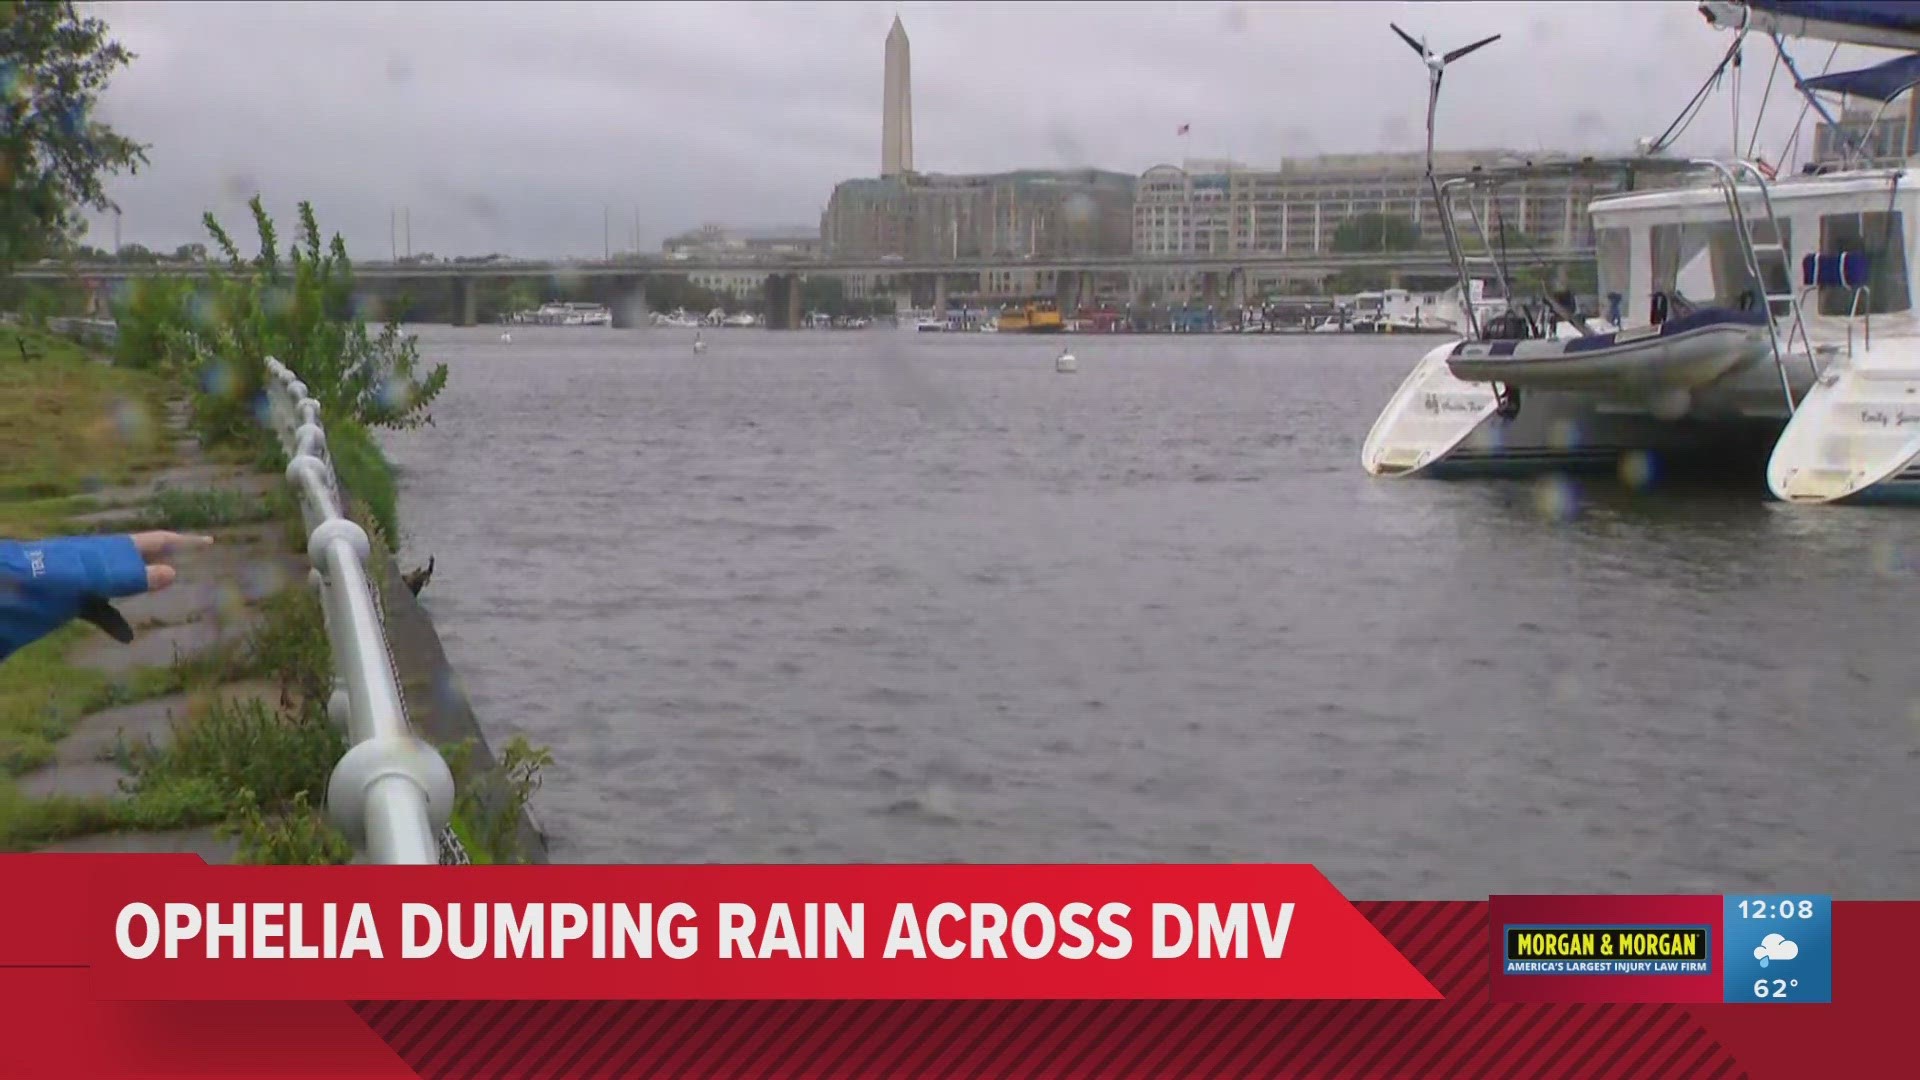 The coastal storm is causing some flooding in some areas of D.C.